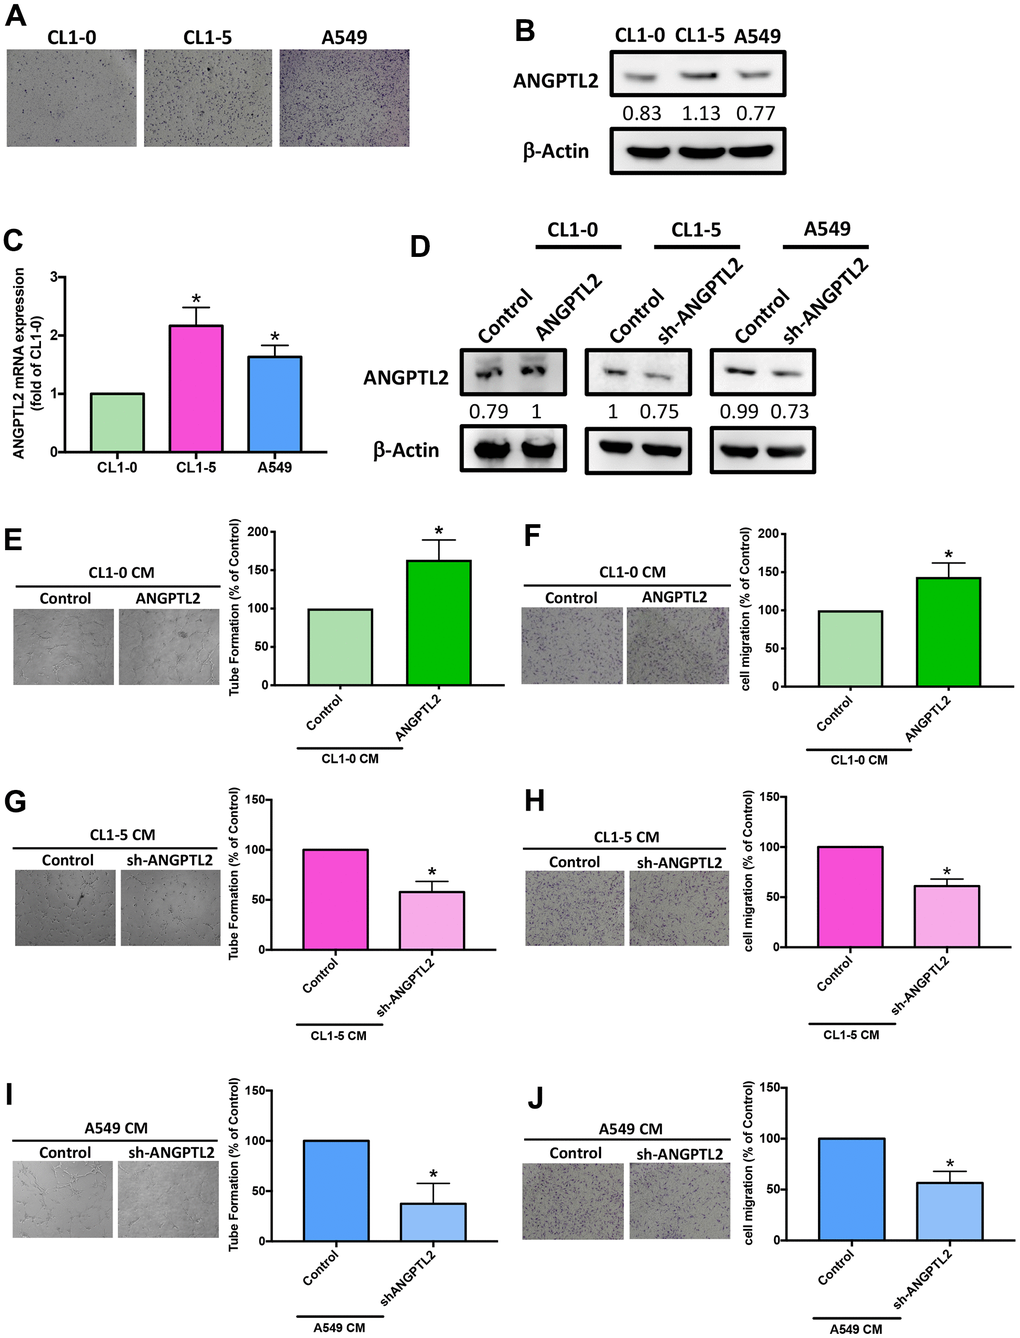 ANGPTL2 levels correlate with lung cancer cell migratory activity and facilitate LEC tube formation and migration. (A) The migratory ability of human lung cancer cell lines (CL1-0, CL1-5 and A549) was measured by the Transwell assay. (B, C) ANGPTL2 mRNA and protein expression in lung cancer cell lines was examined by Western blot (n=3) and qPCR. (D) Cells were transfected with ANGPTL2 cDNA or shRNA, then ANGPTL2 expression was measured by Western blot (n=3). *p E–J) Cells were transfected with ANGPTL2 cDNA or shRNA. The CM was collected and applied to the LECs. LEC tube formation and migration was examined. *p 